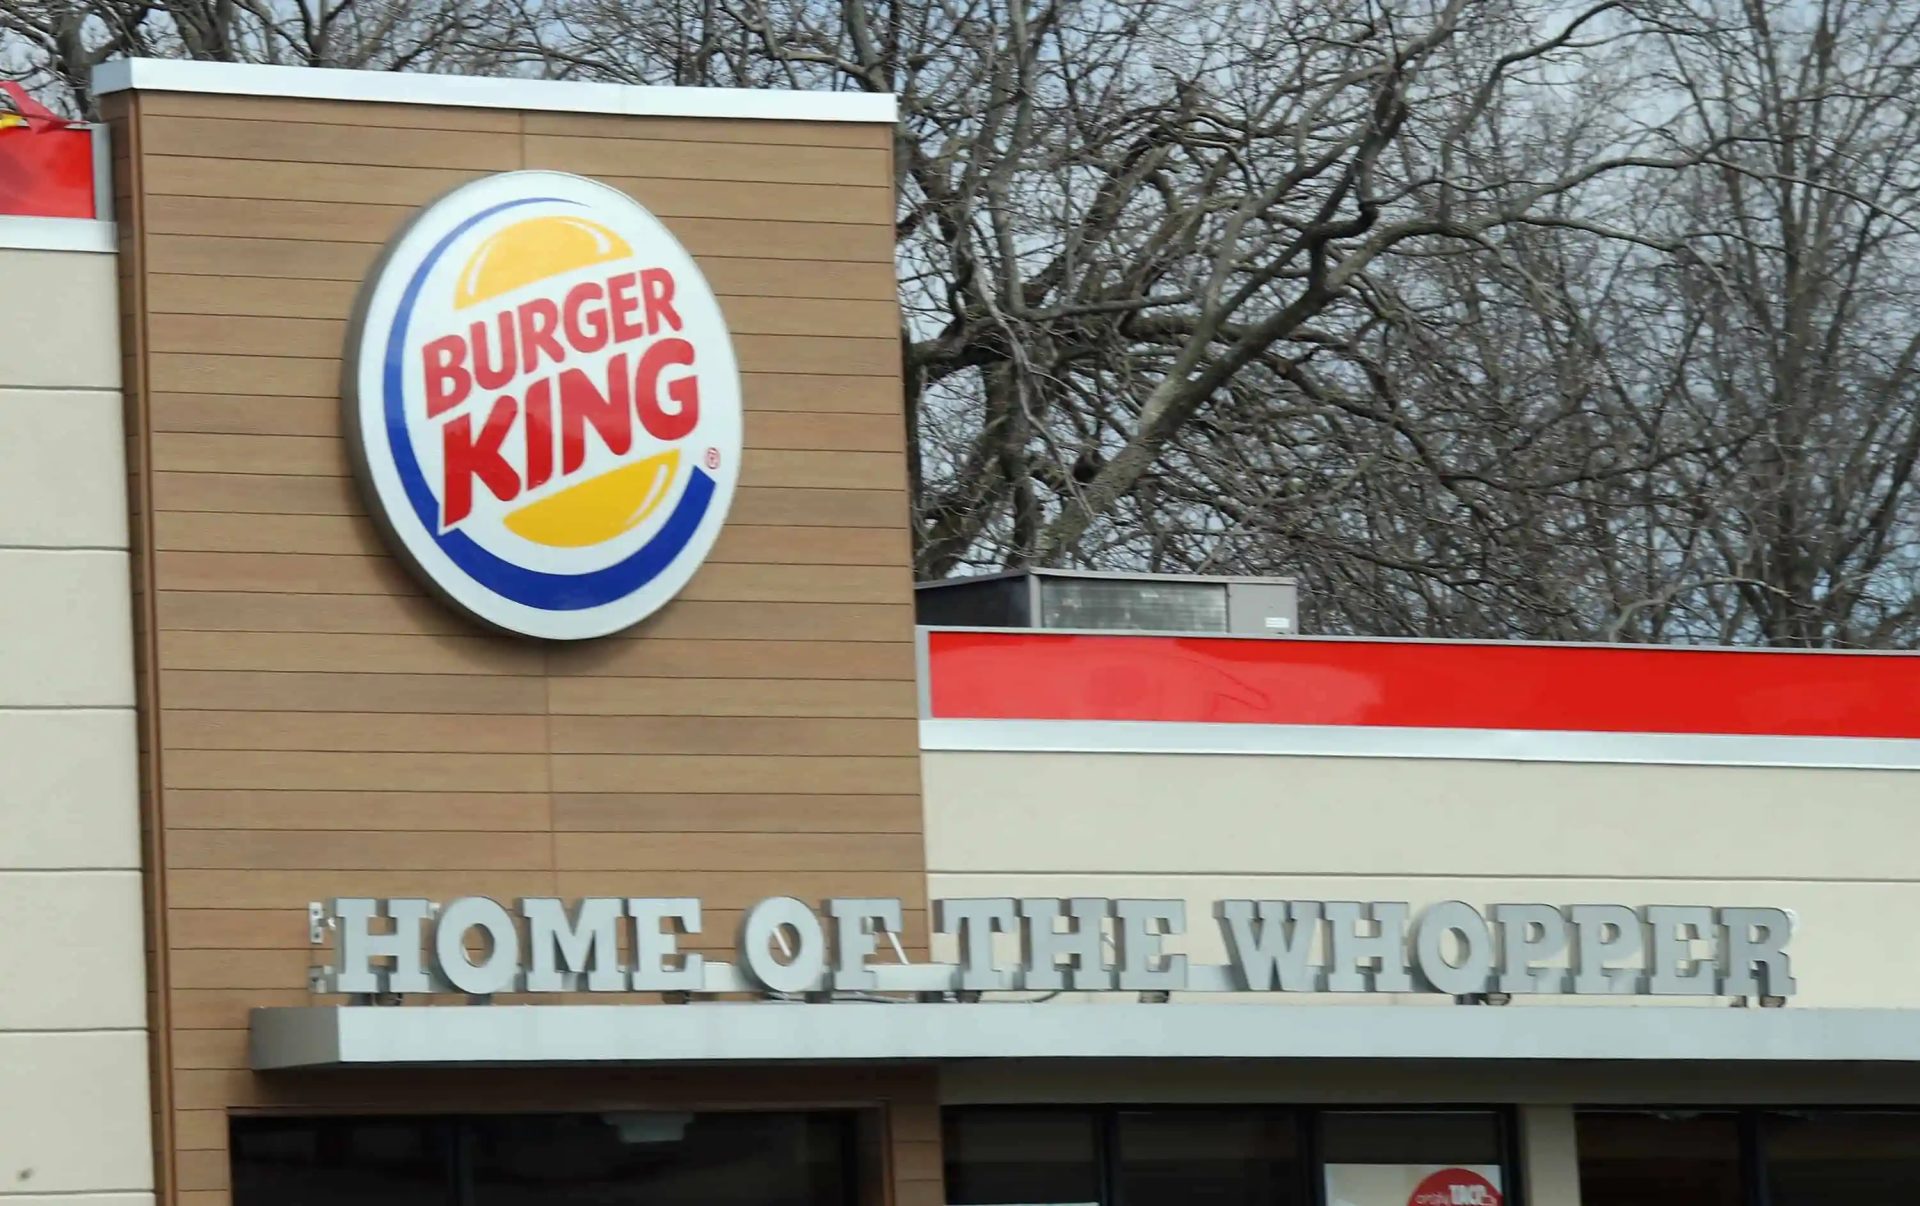 Viral Burger King Worker Snubbed By Company After Not Missing A Day of Work in 27 Years Receives $200k In GoFundMe Donations